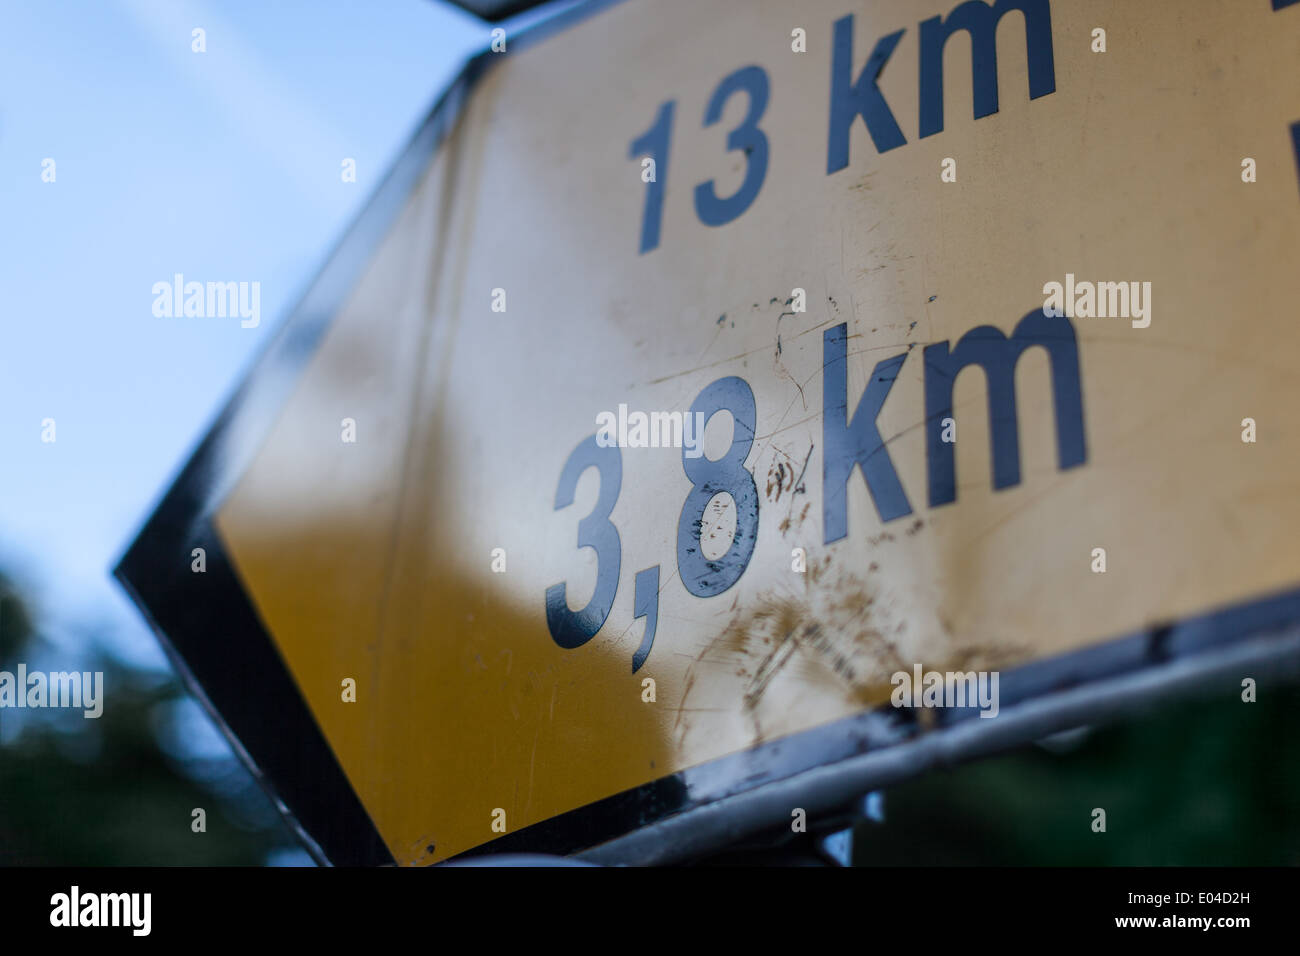 a worn and scratched road sign indicating the distance of 13 and 3,8 km Stock Photo